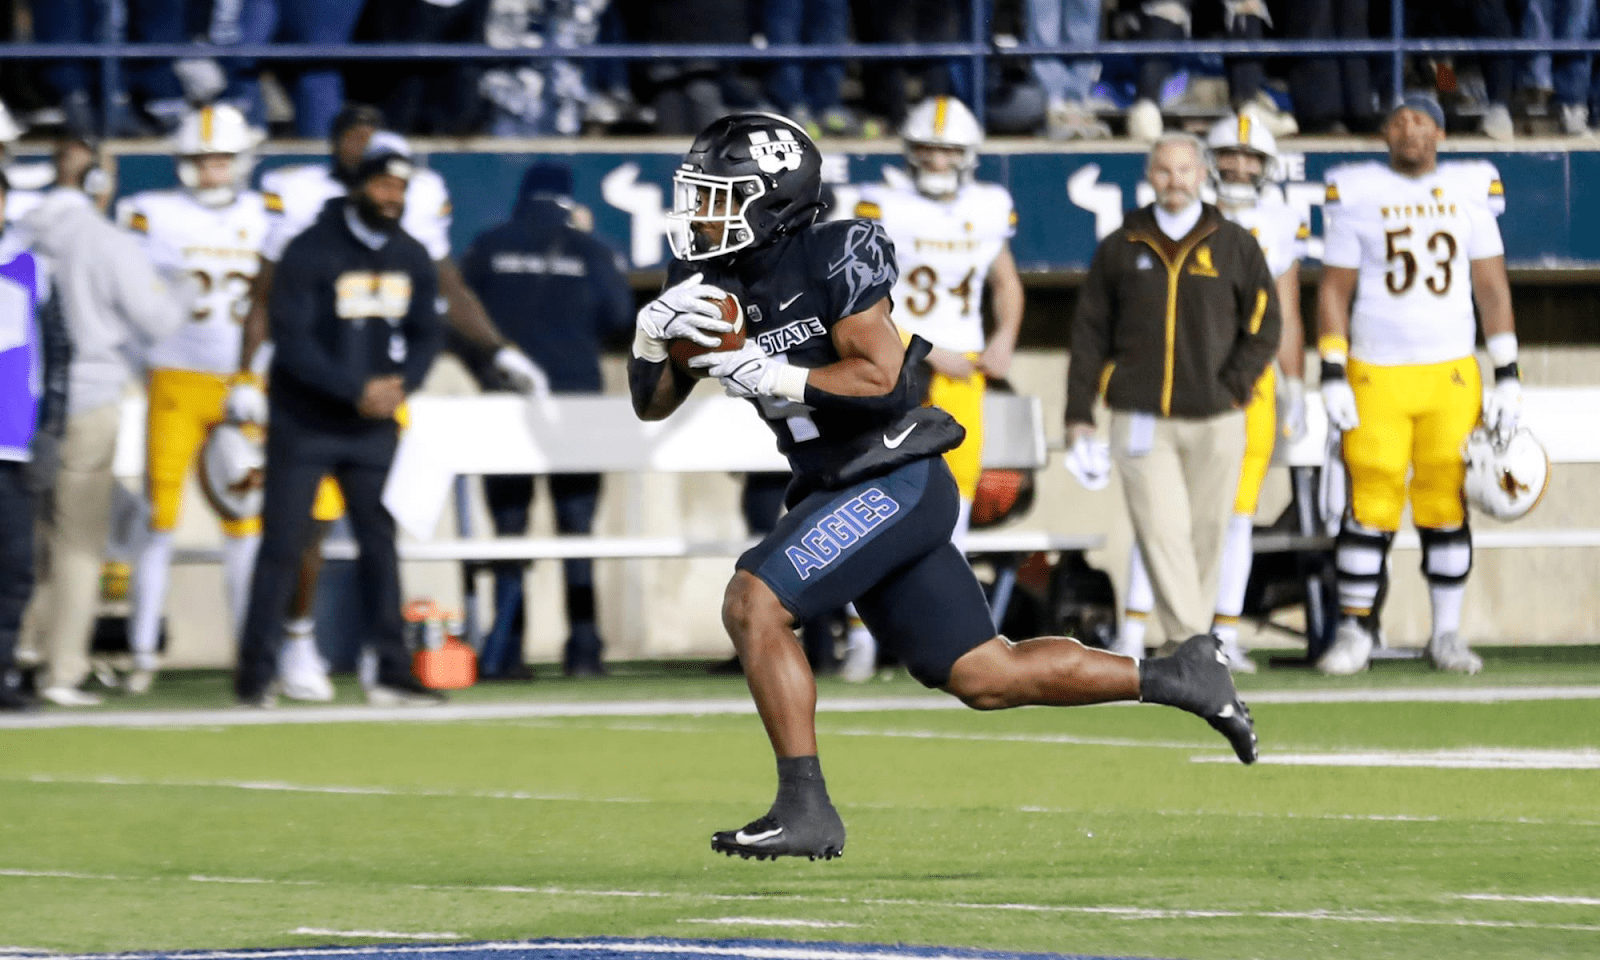 Calvin Tyler Jr. is a veteran RB at Utah State who exhibits good strength and balance as a runner. Hula Bowl scout, Jacob Waxman breaks down Tyler's strengths and weaknesses as an NFL Prospect in this article.